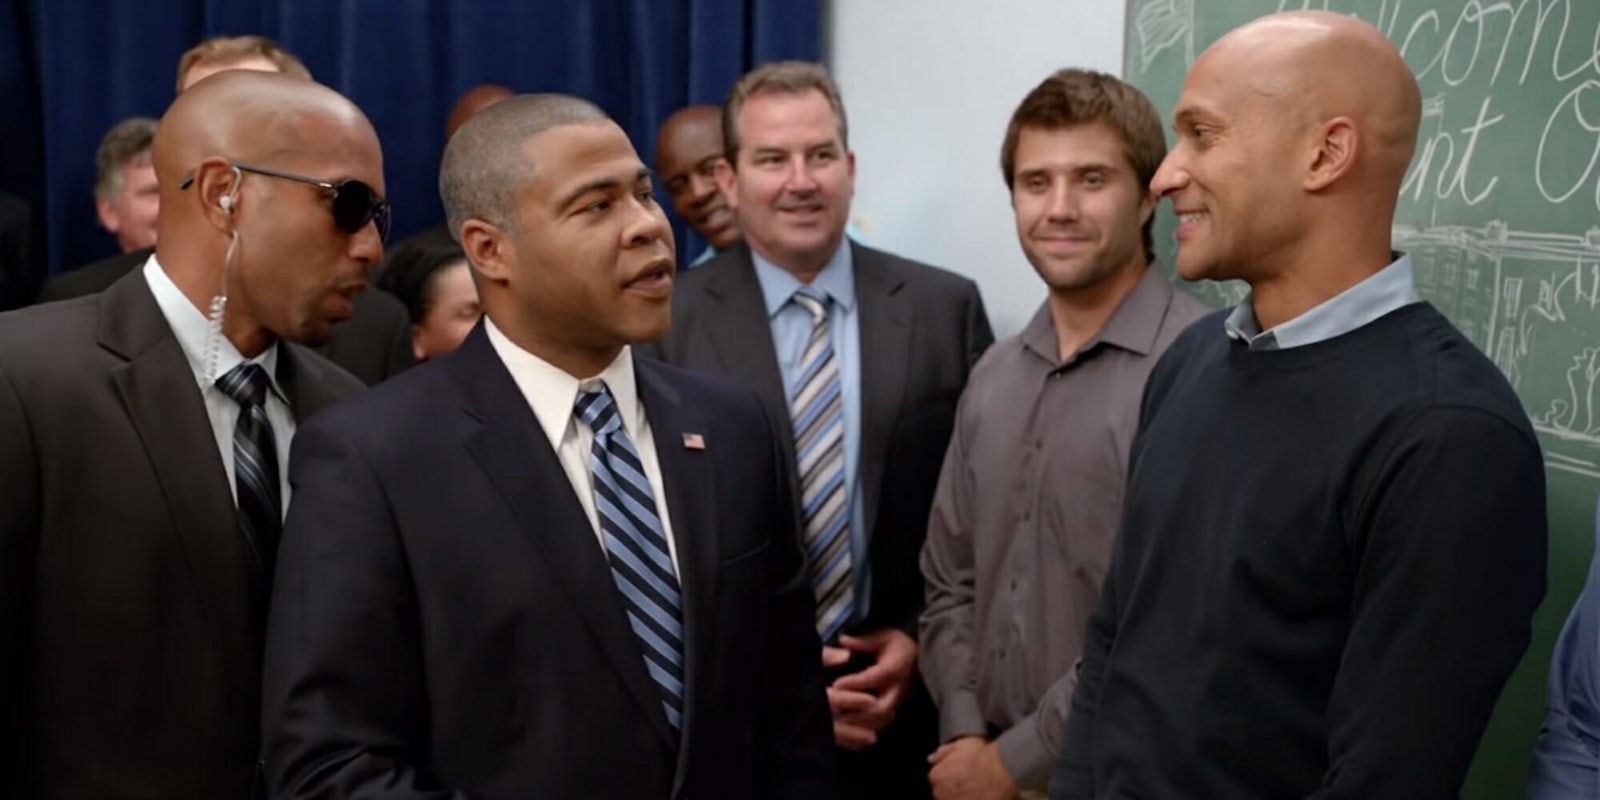 The Key and Peele handshake meme has taken over the internet. Here are some of the best hits.